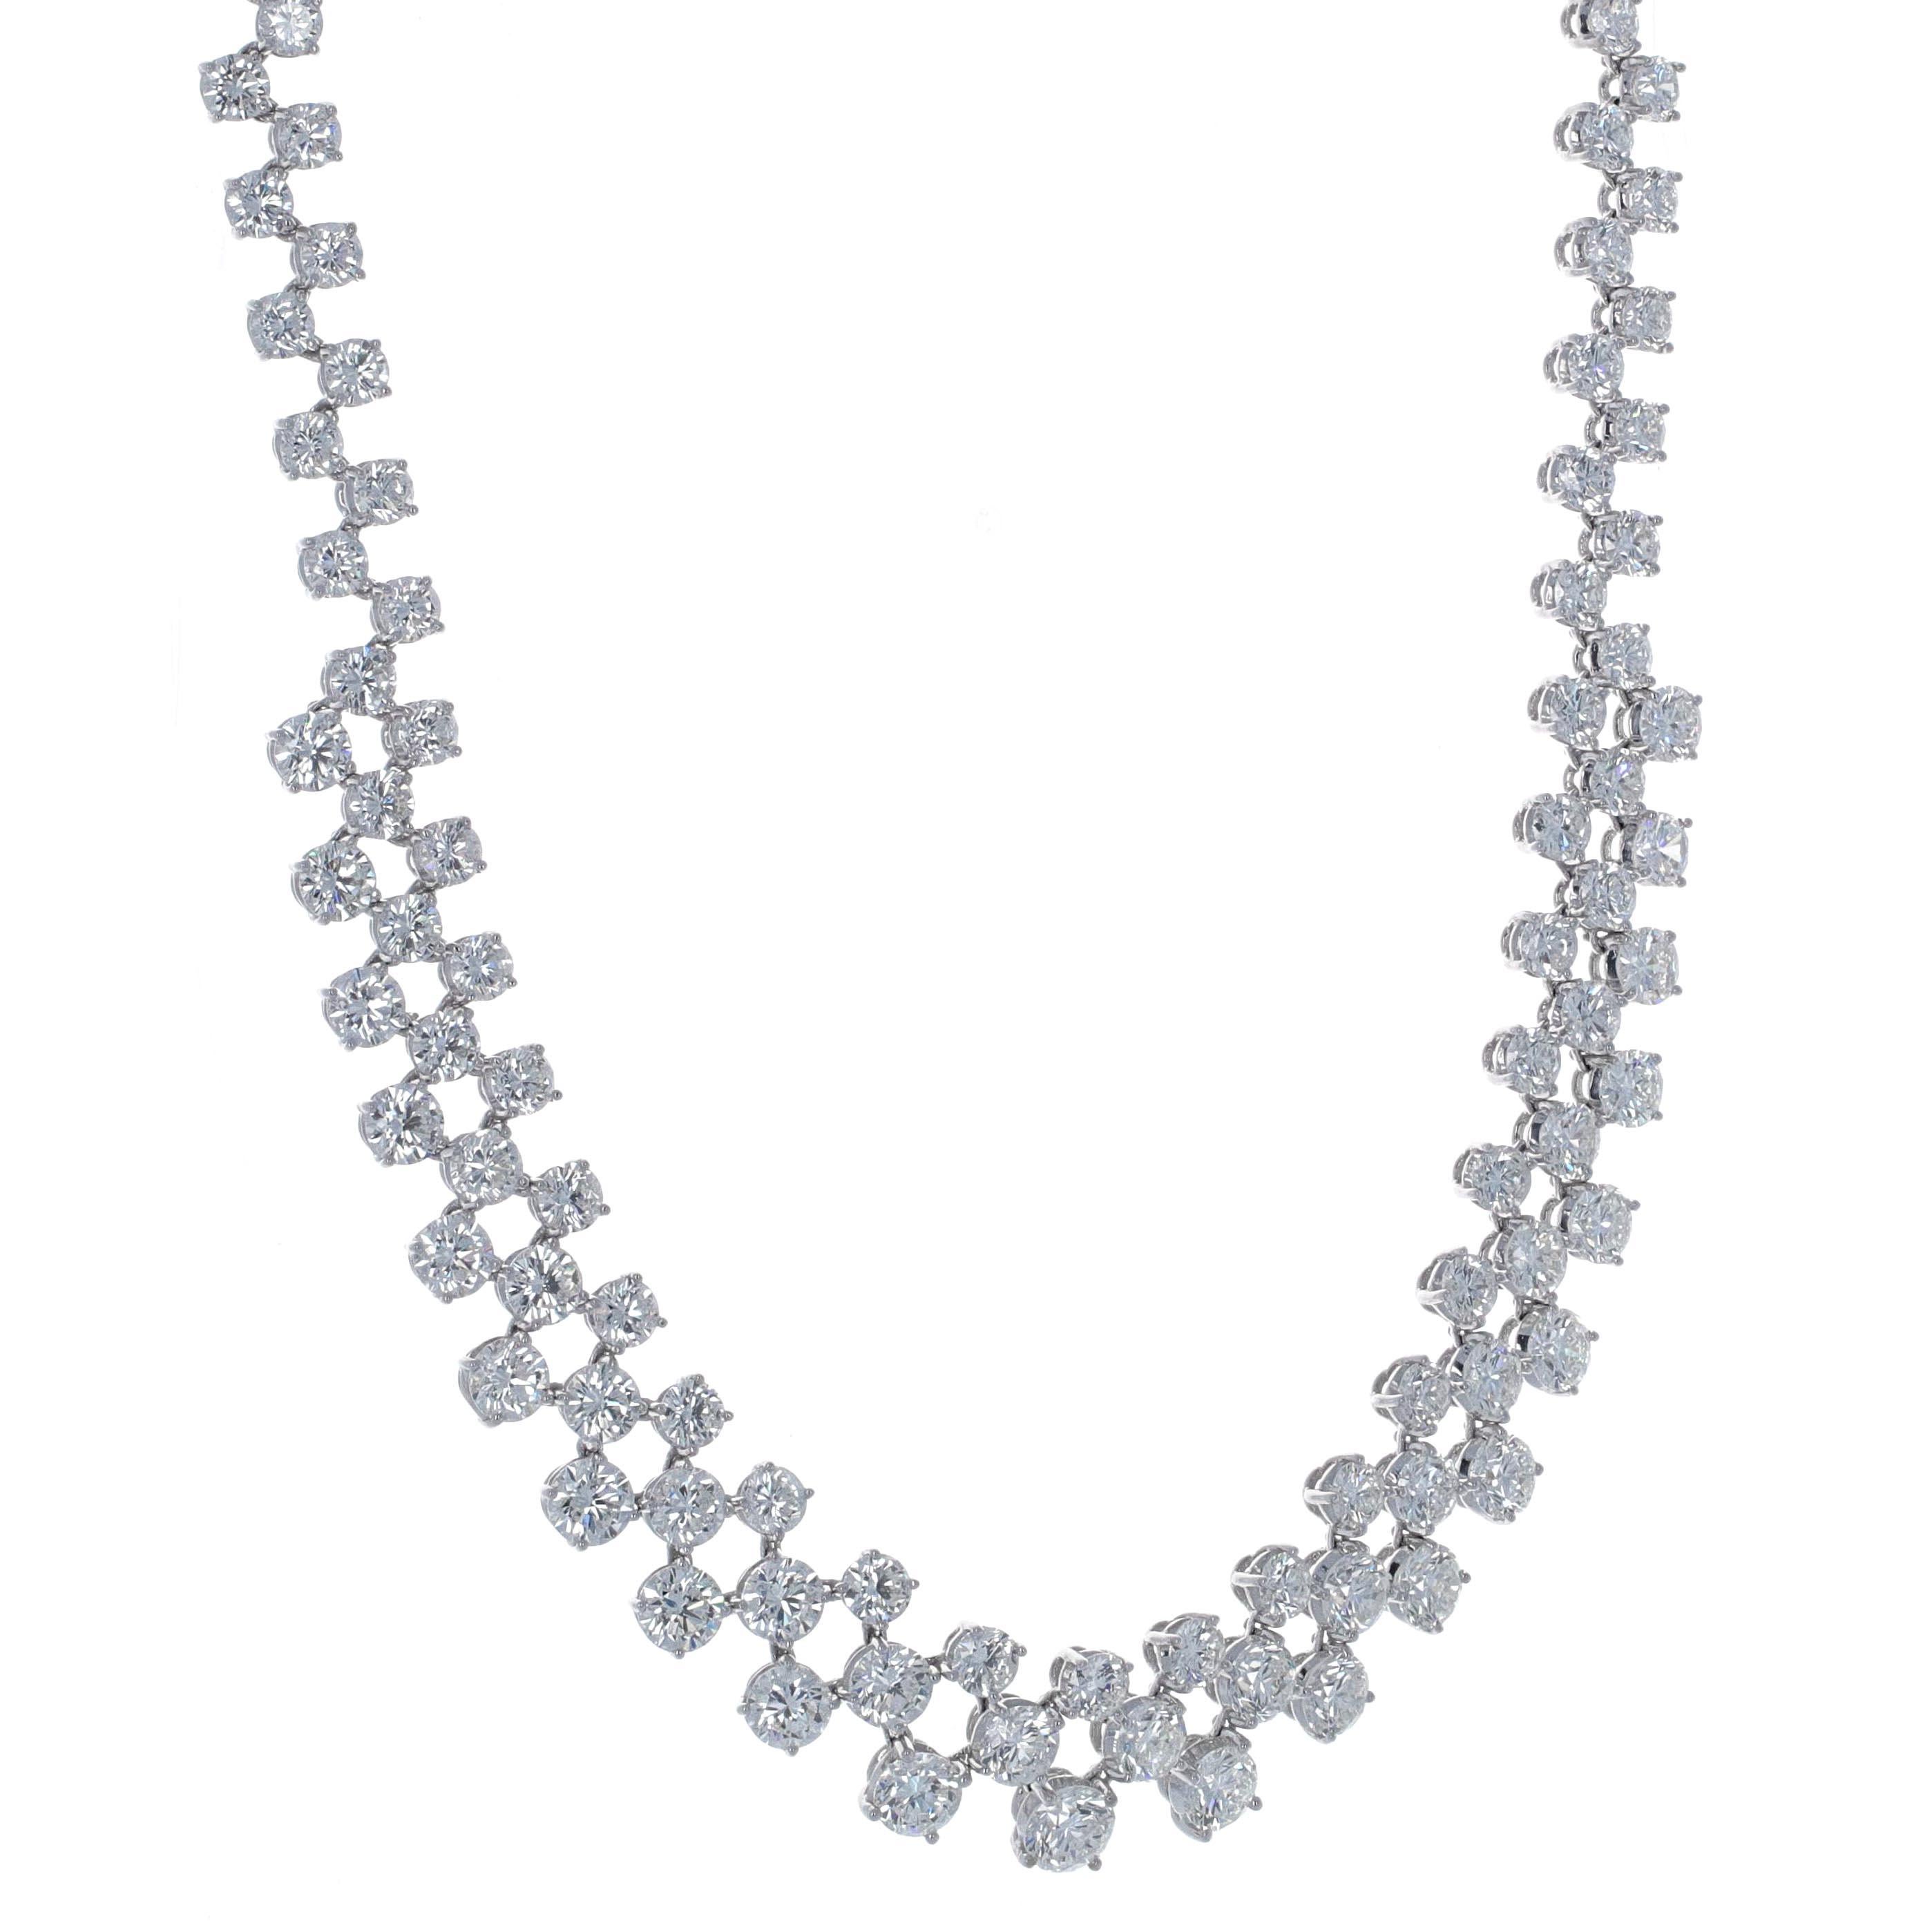 Beautifully made diamond tennis necklace. The necklace lays beautifully and is a show stopper. The design of the necklace is more impresssive than your ordinary diamond riviera. There is more style, sparkle and uniqueness. The necklace is made in 18